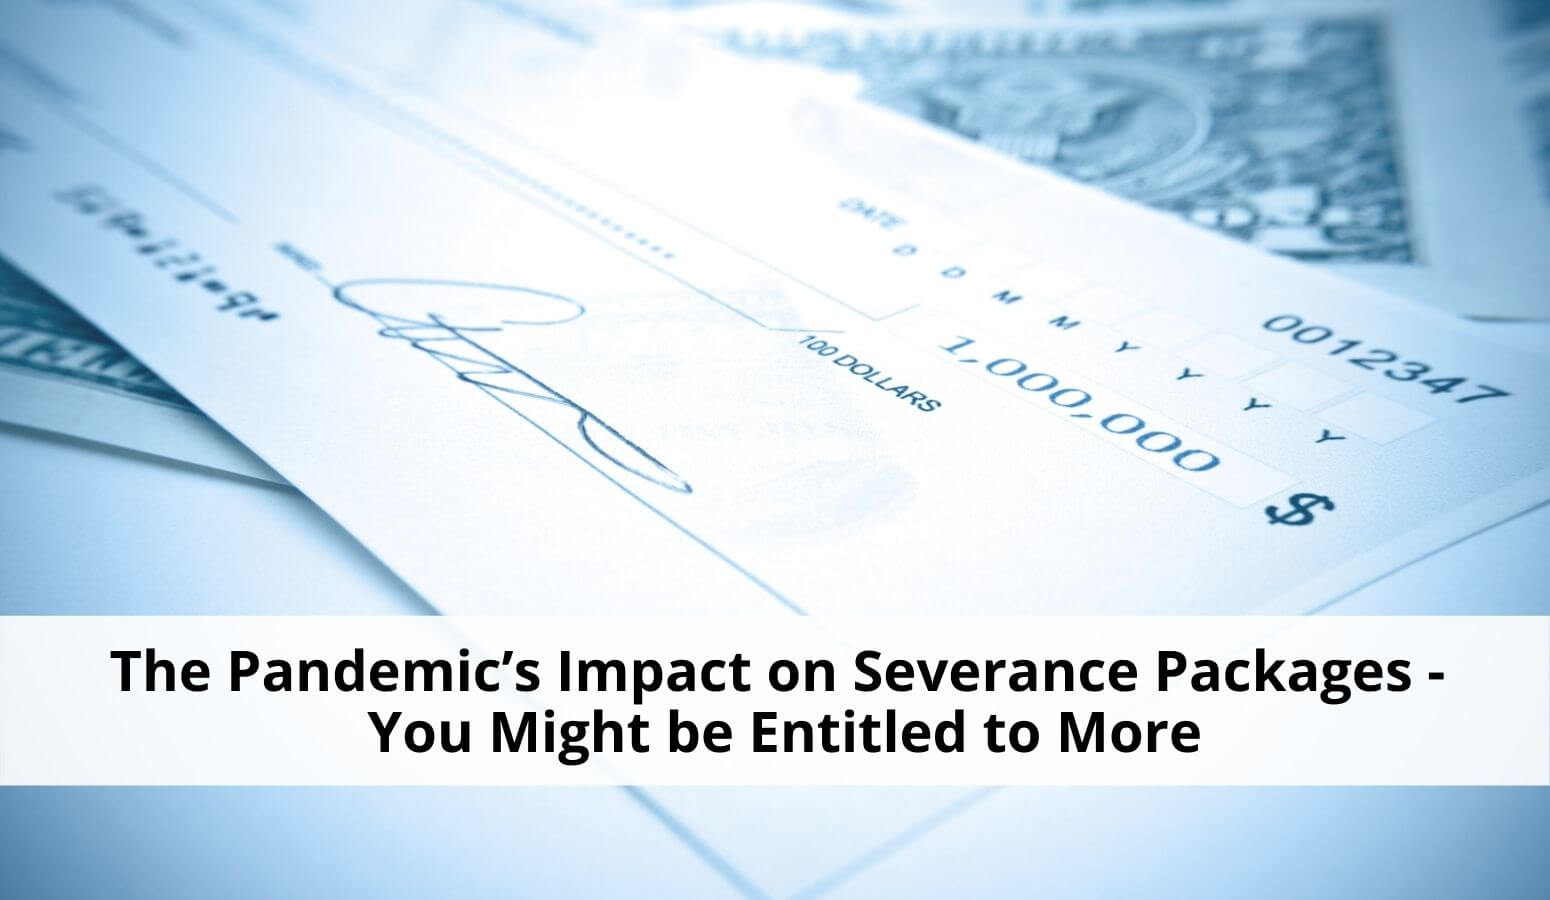 Featured image for “The Pandemic’s Impact on Severance Packages”